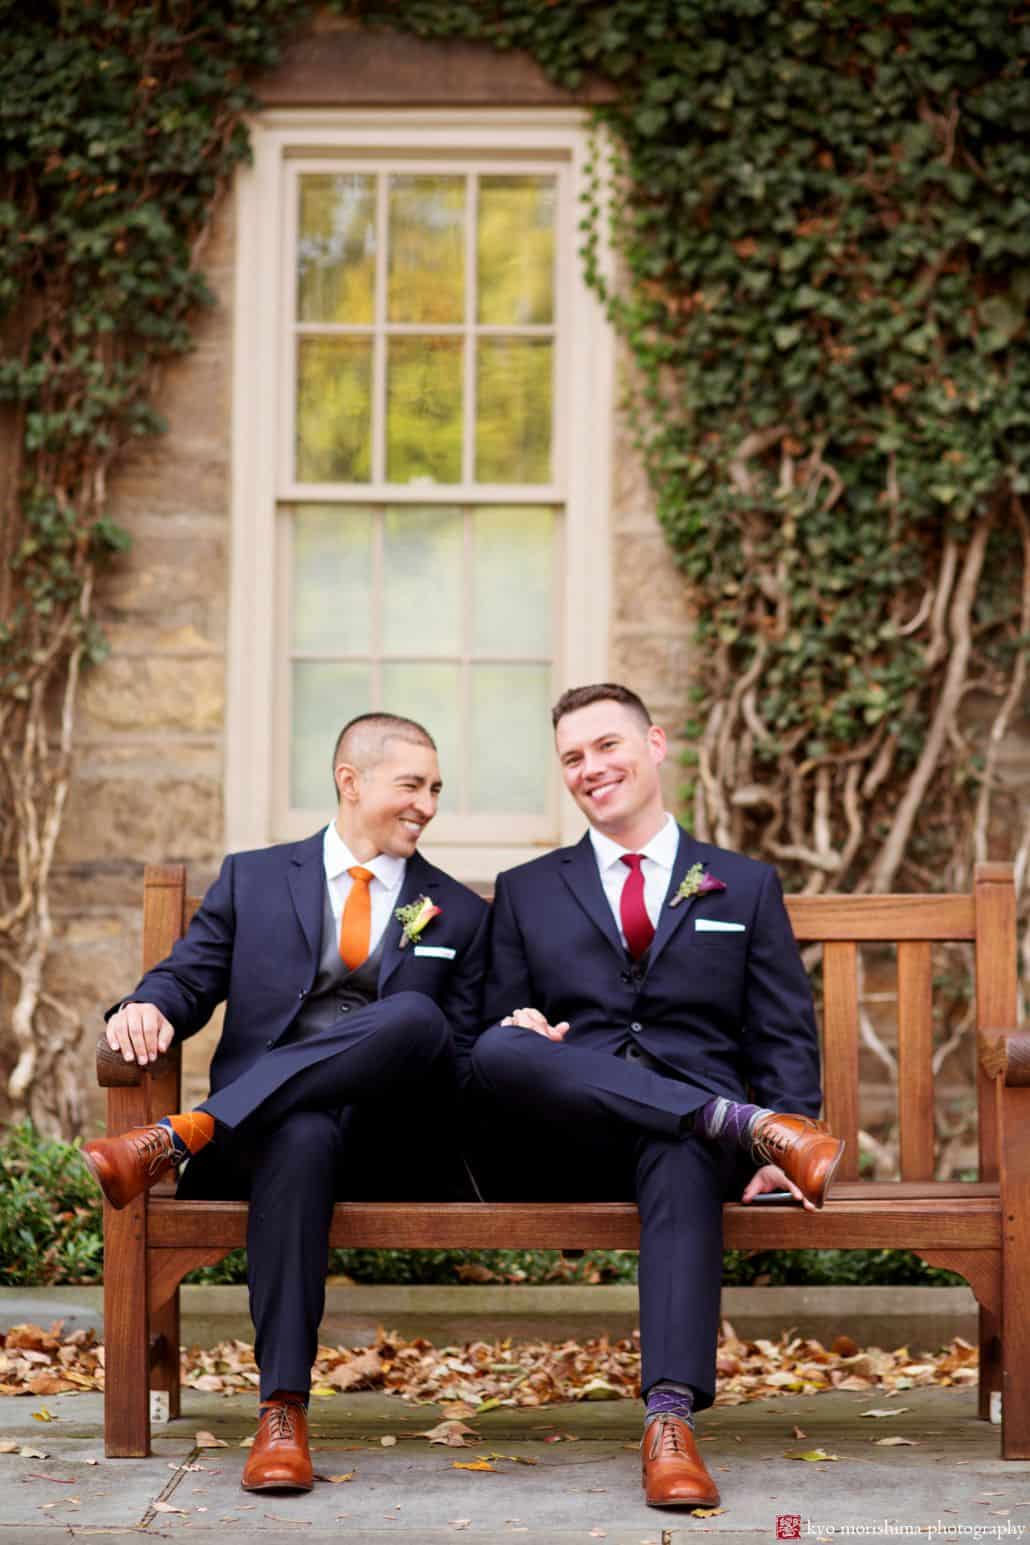 Light-hearted portrait session of two happy men sitting on a brown bench, wearing a navy blue suit and brown shoes, and they have a wall with window and vines background, photographed by wedding photographer in central NJ Kyo Morishima.